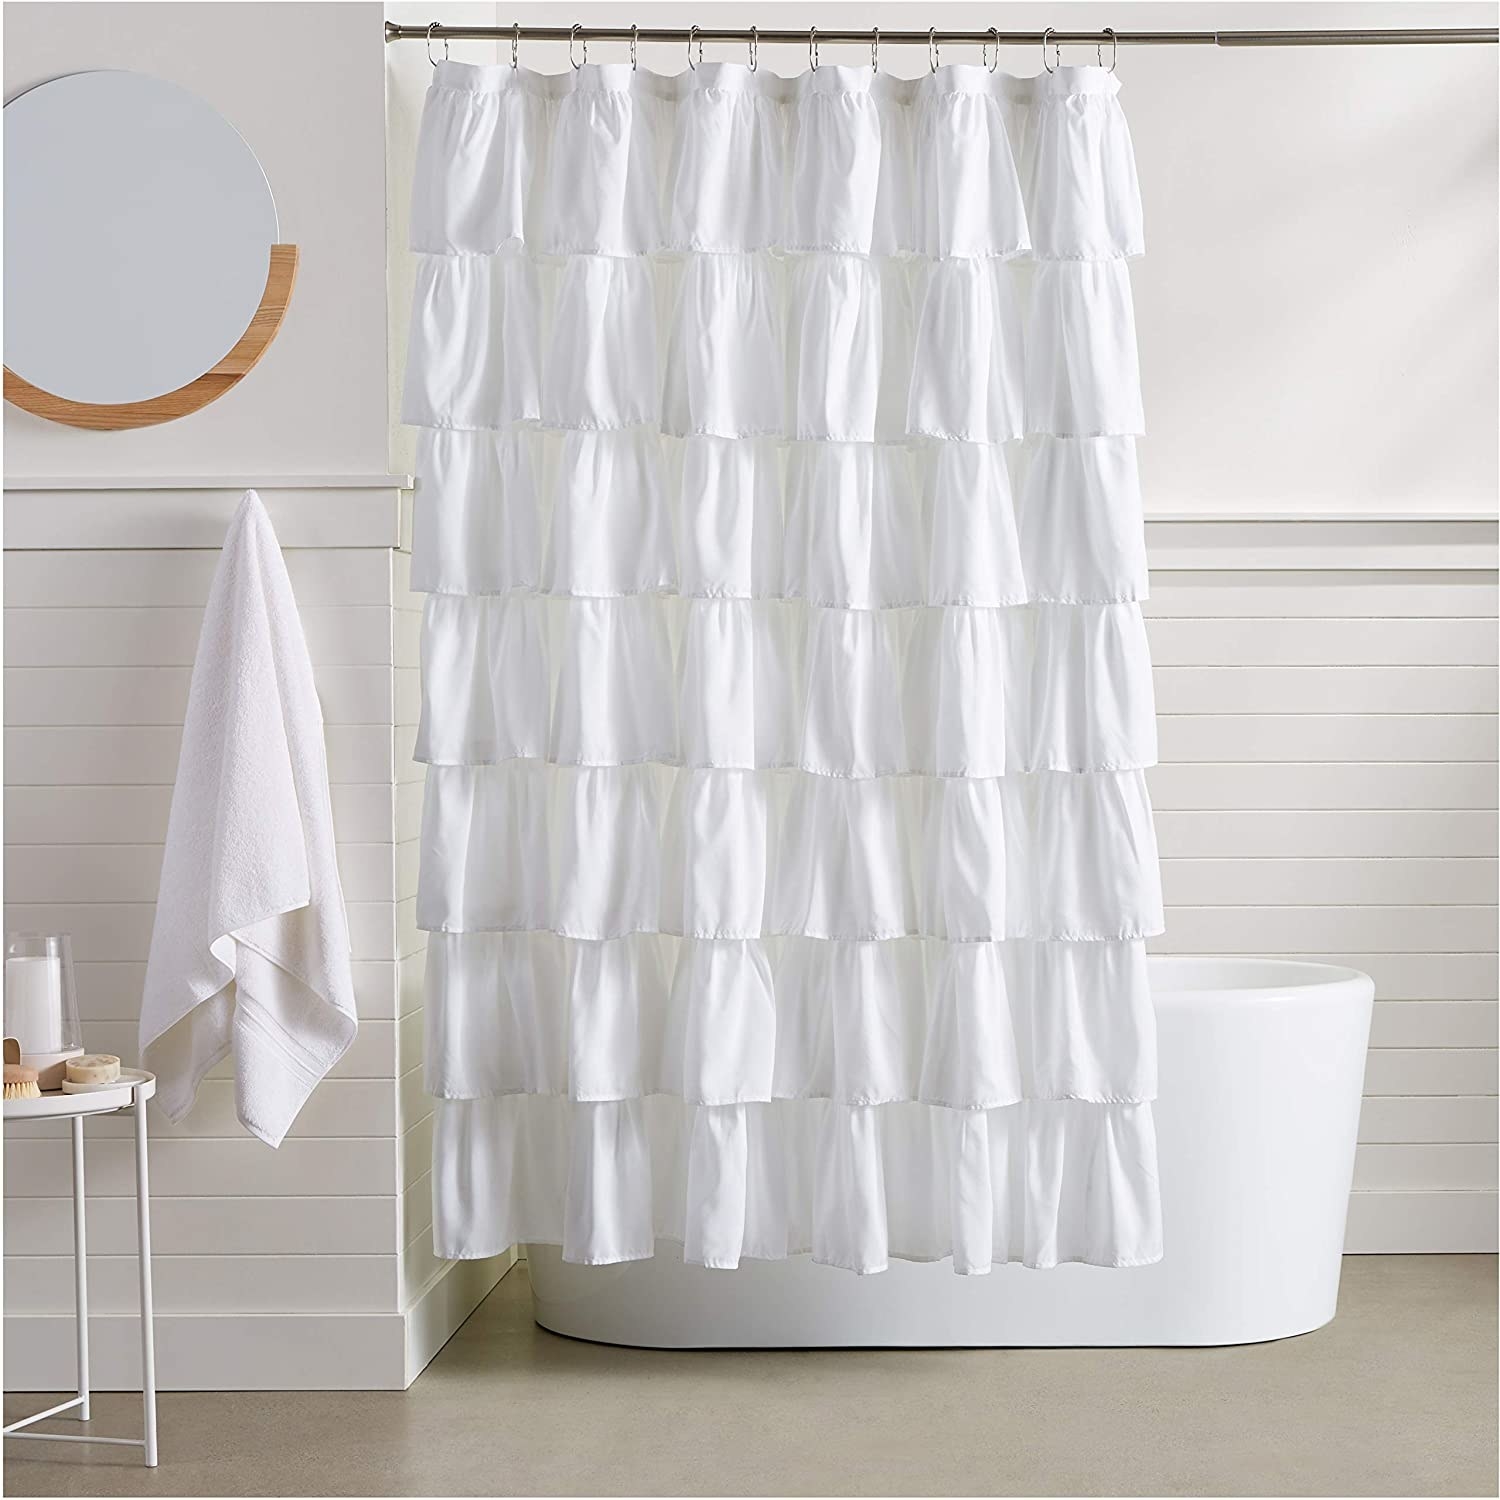 The shower curtain pulled in front of a bathtub